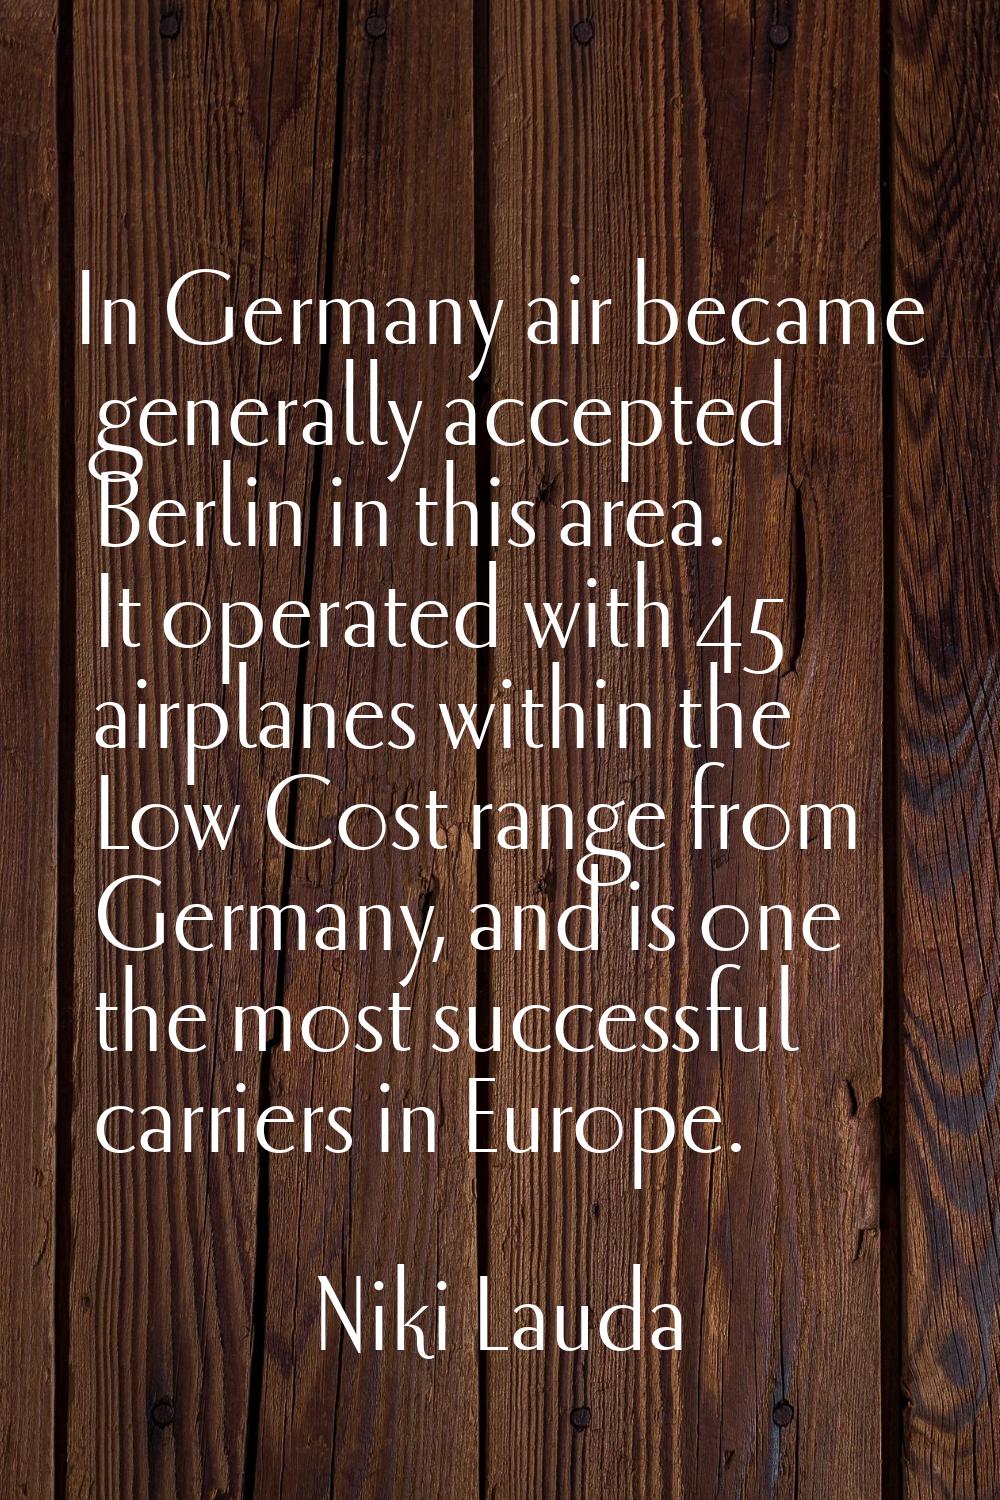 In Germany air became generally accepted Berlin in this area. It operated with 45 airplanes within 